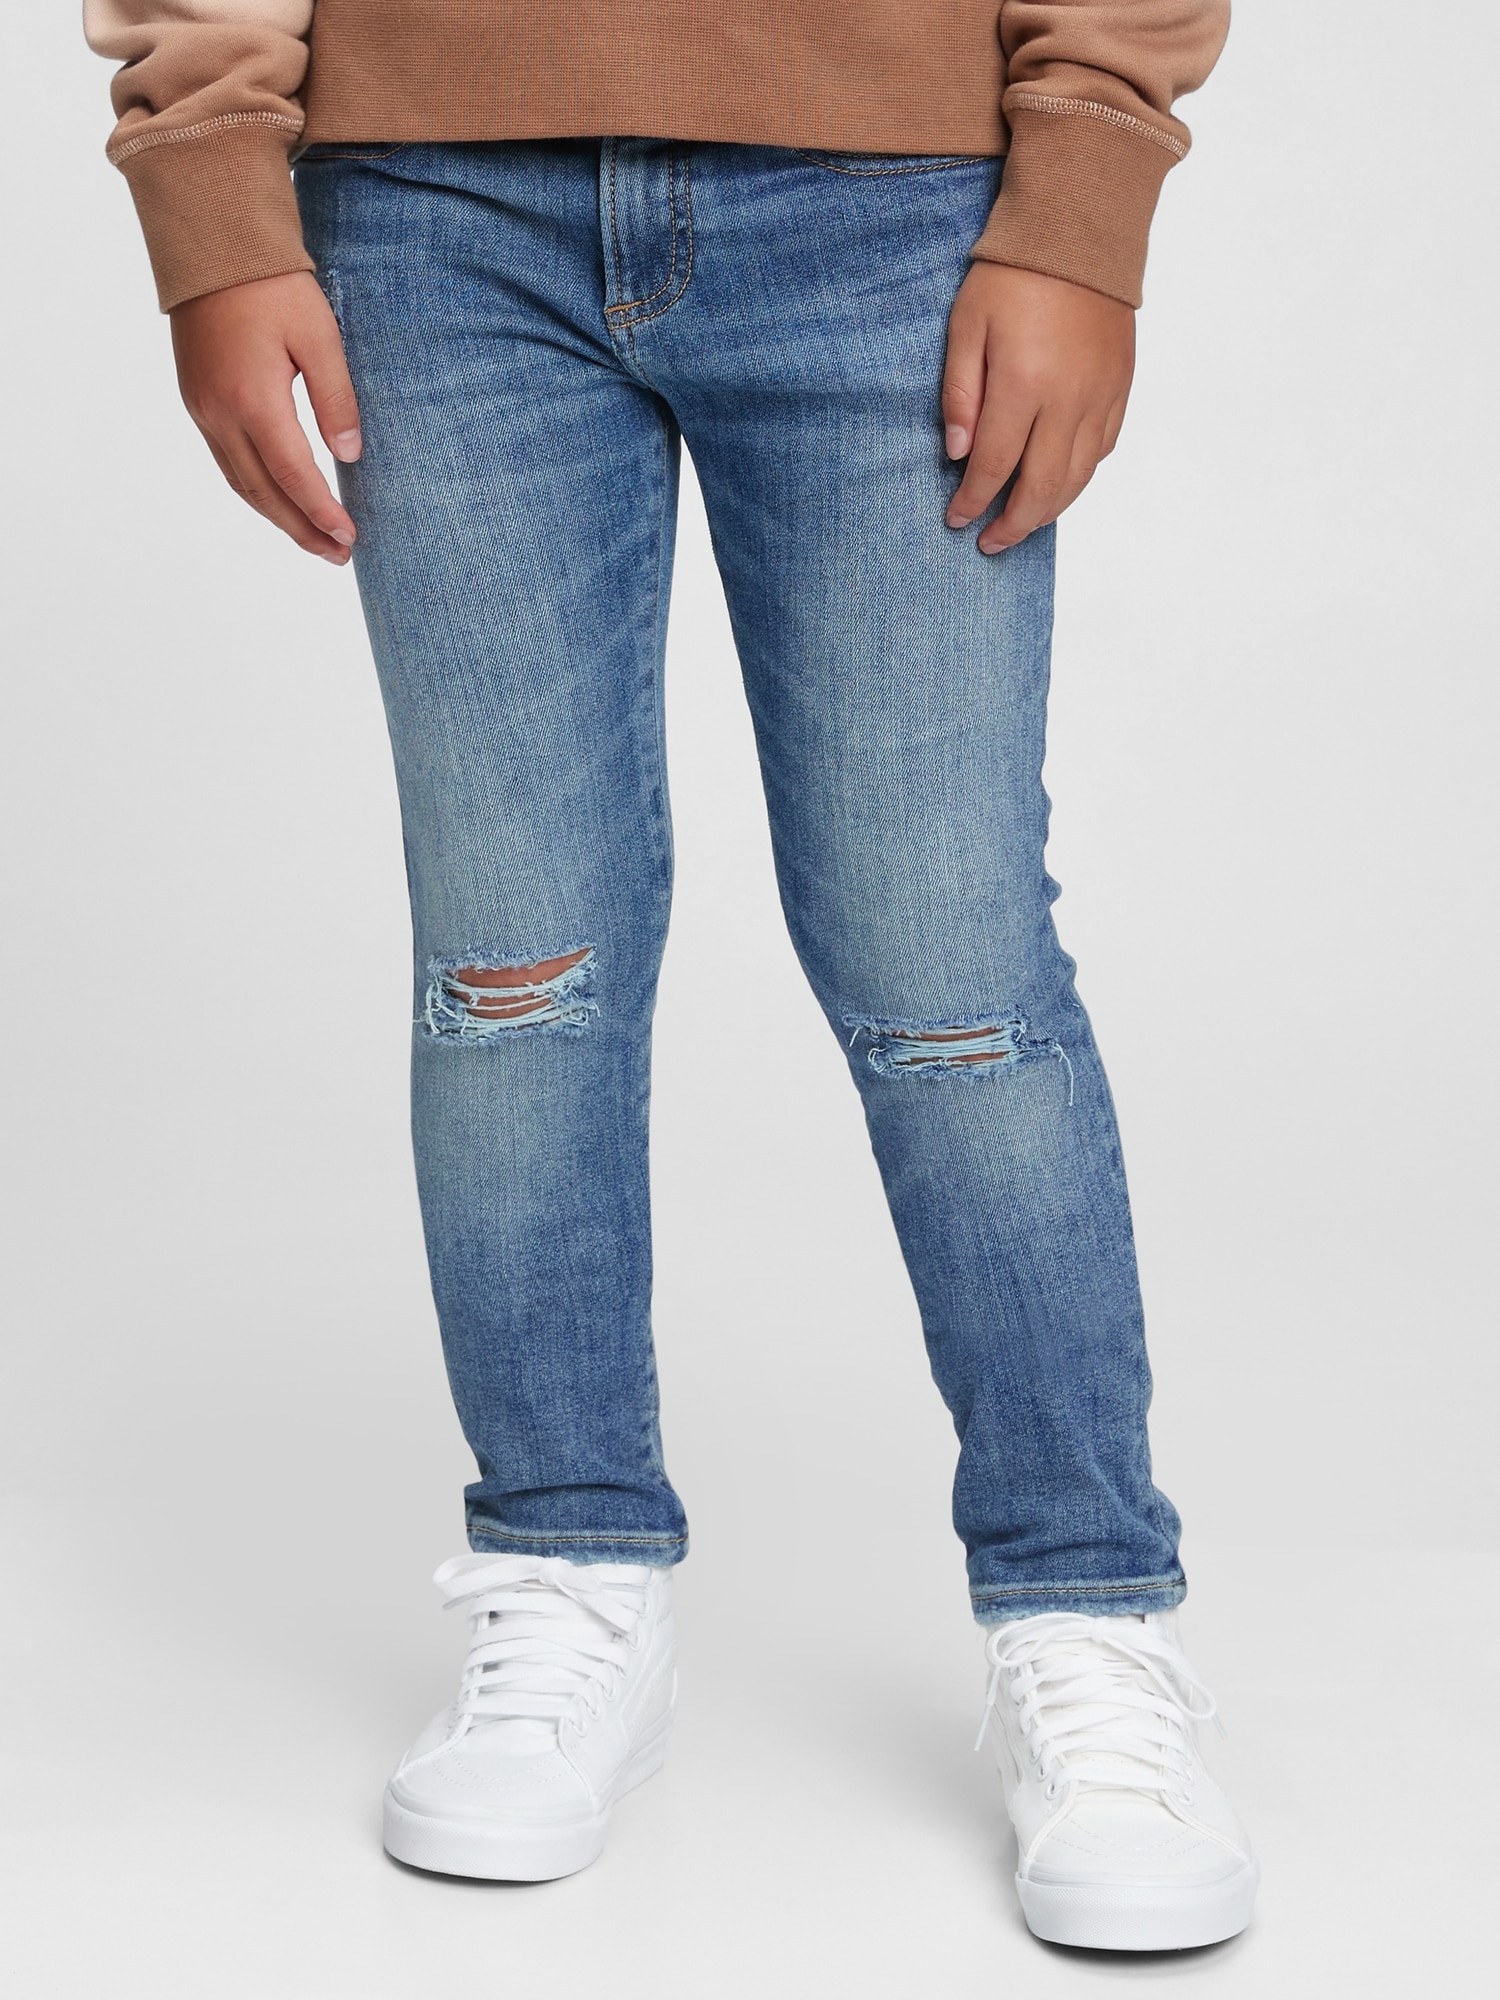 Kids Distressed Skinny Jeans with Washwell™ | Gap